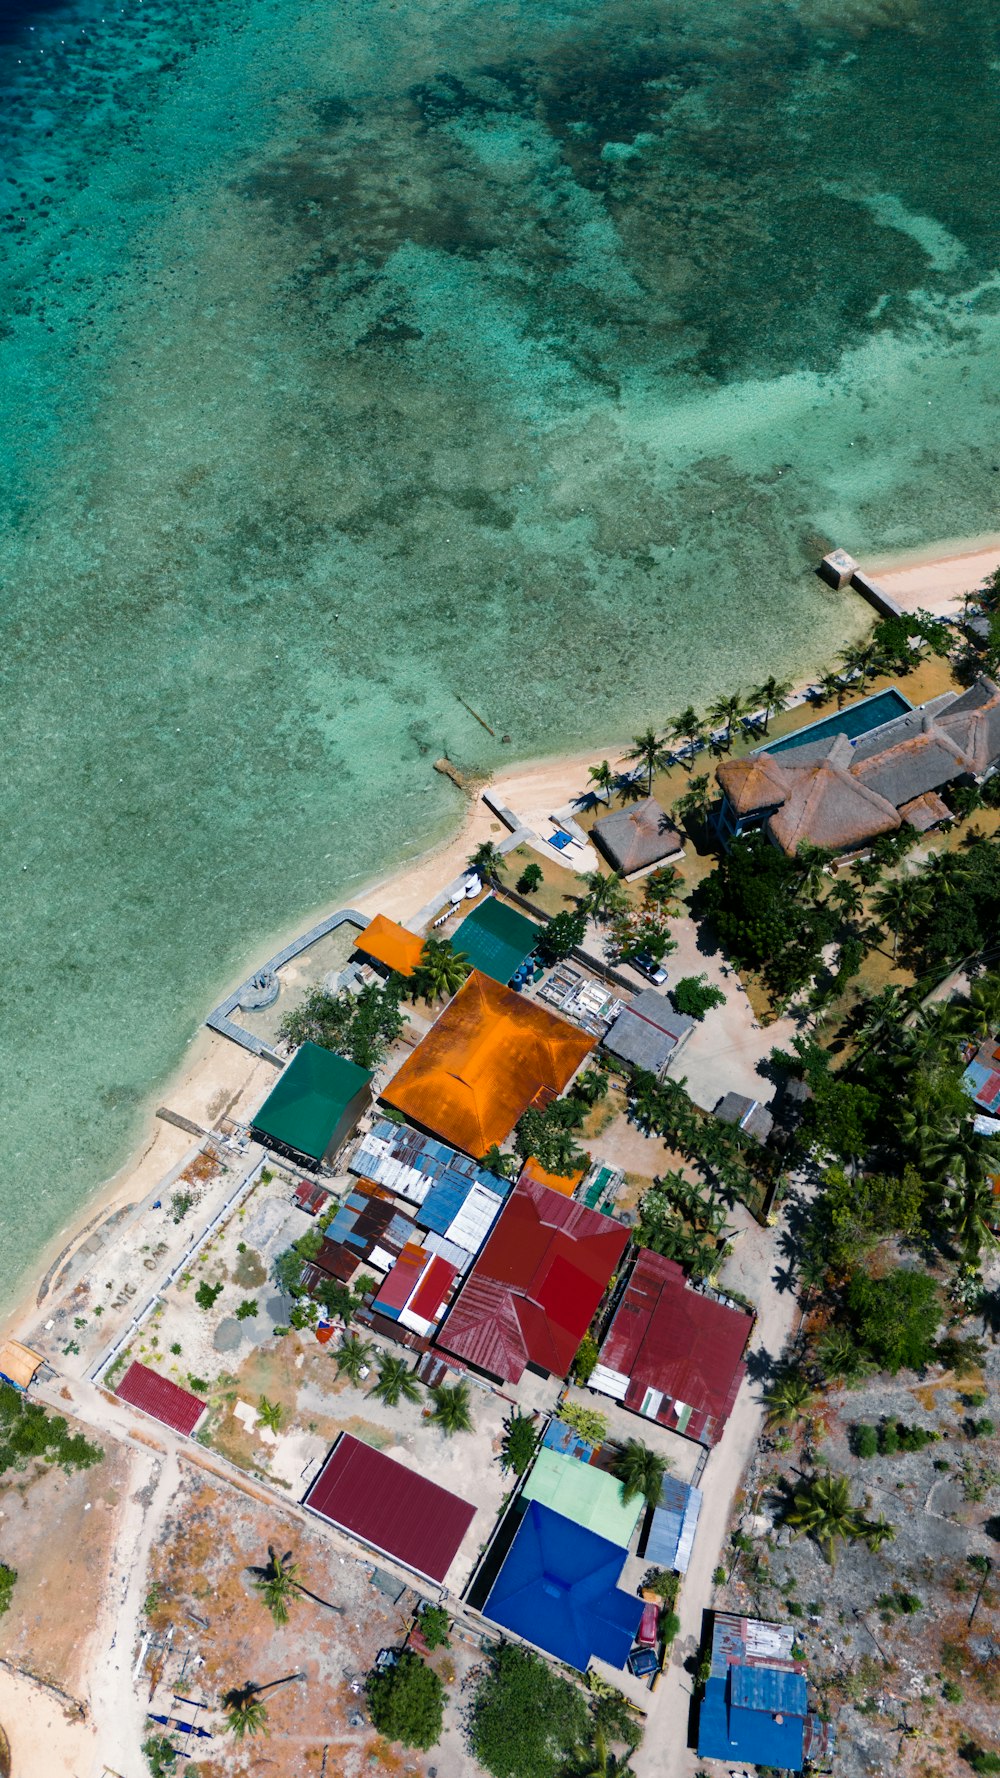 an aerial view of a small village on a beach